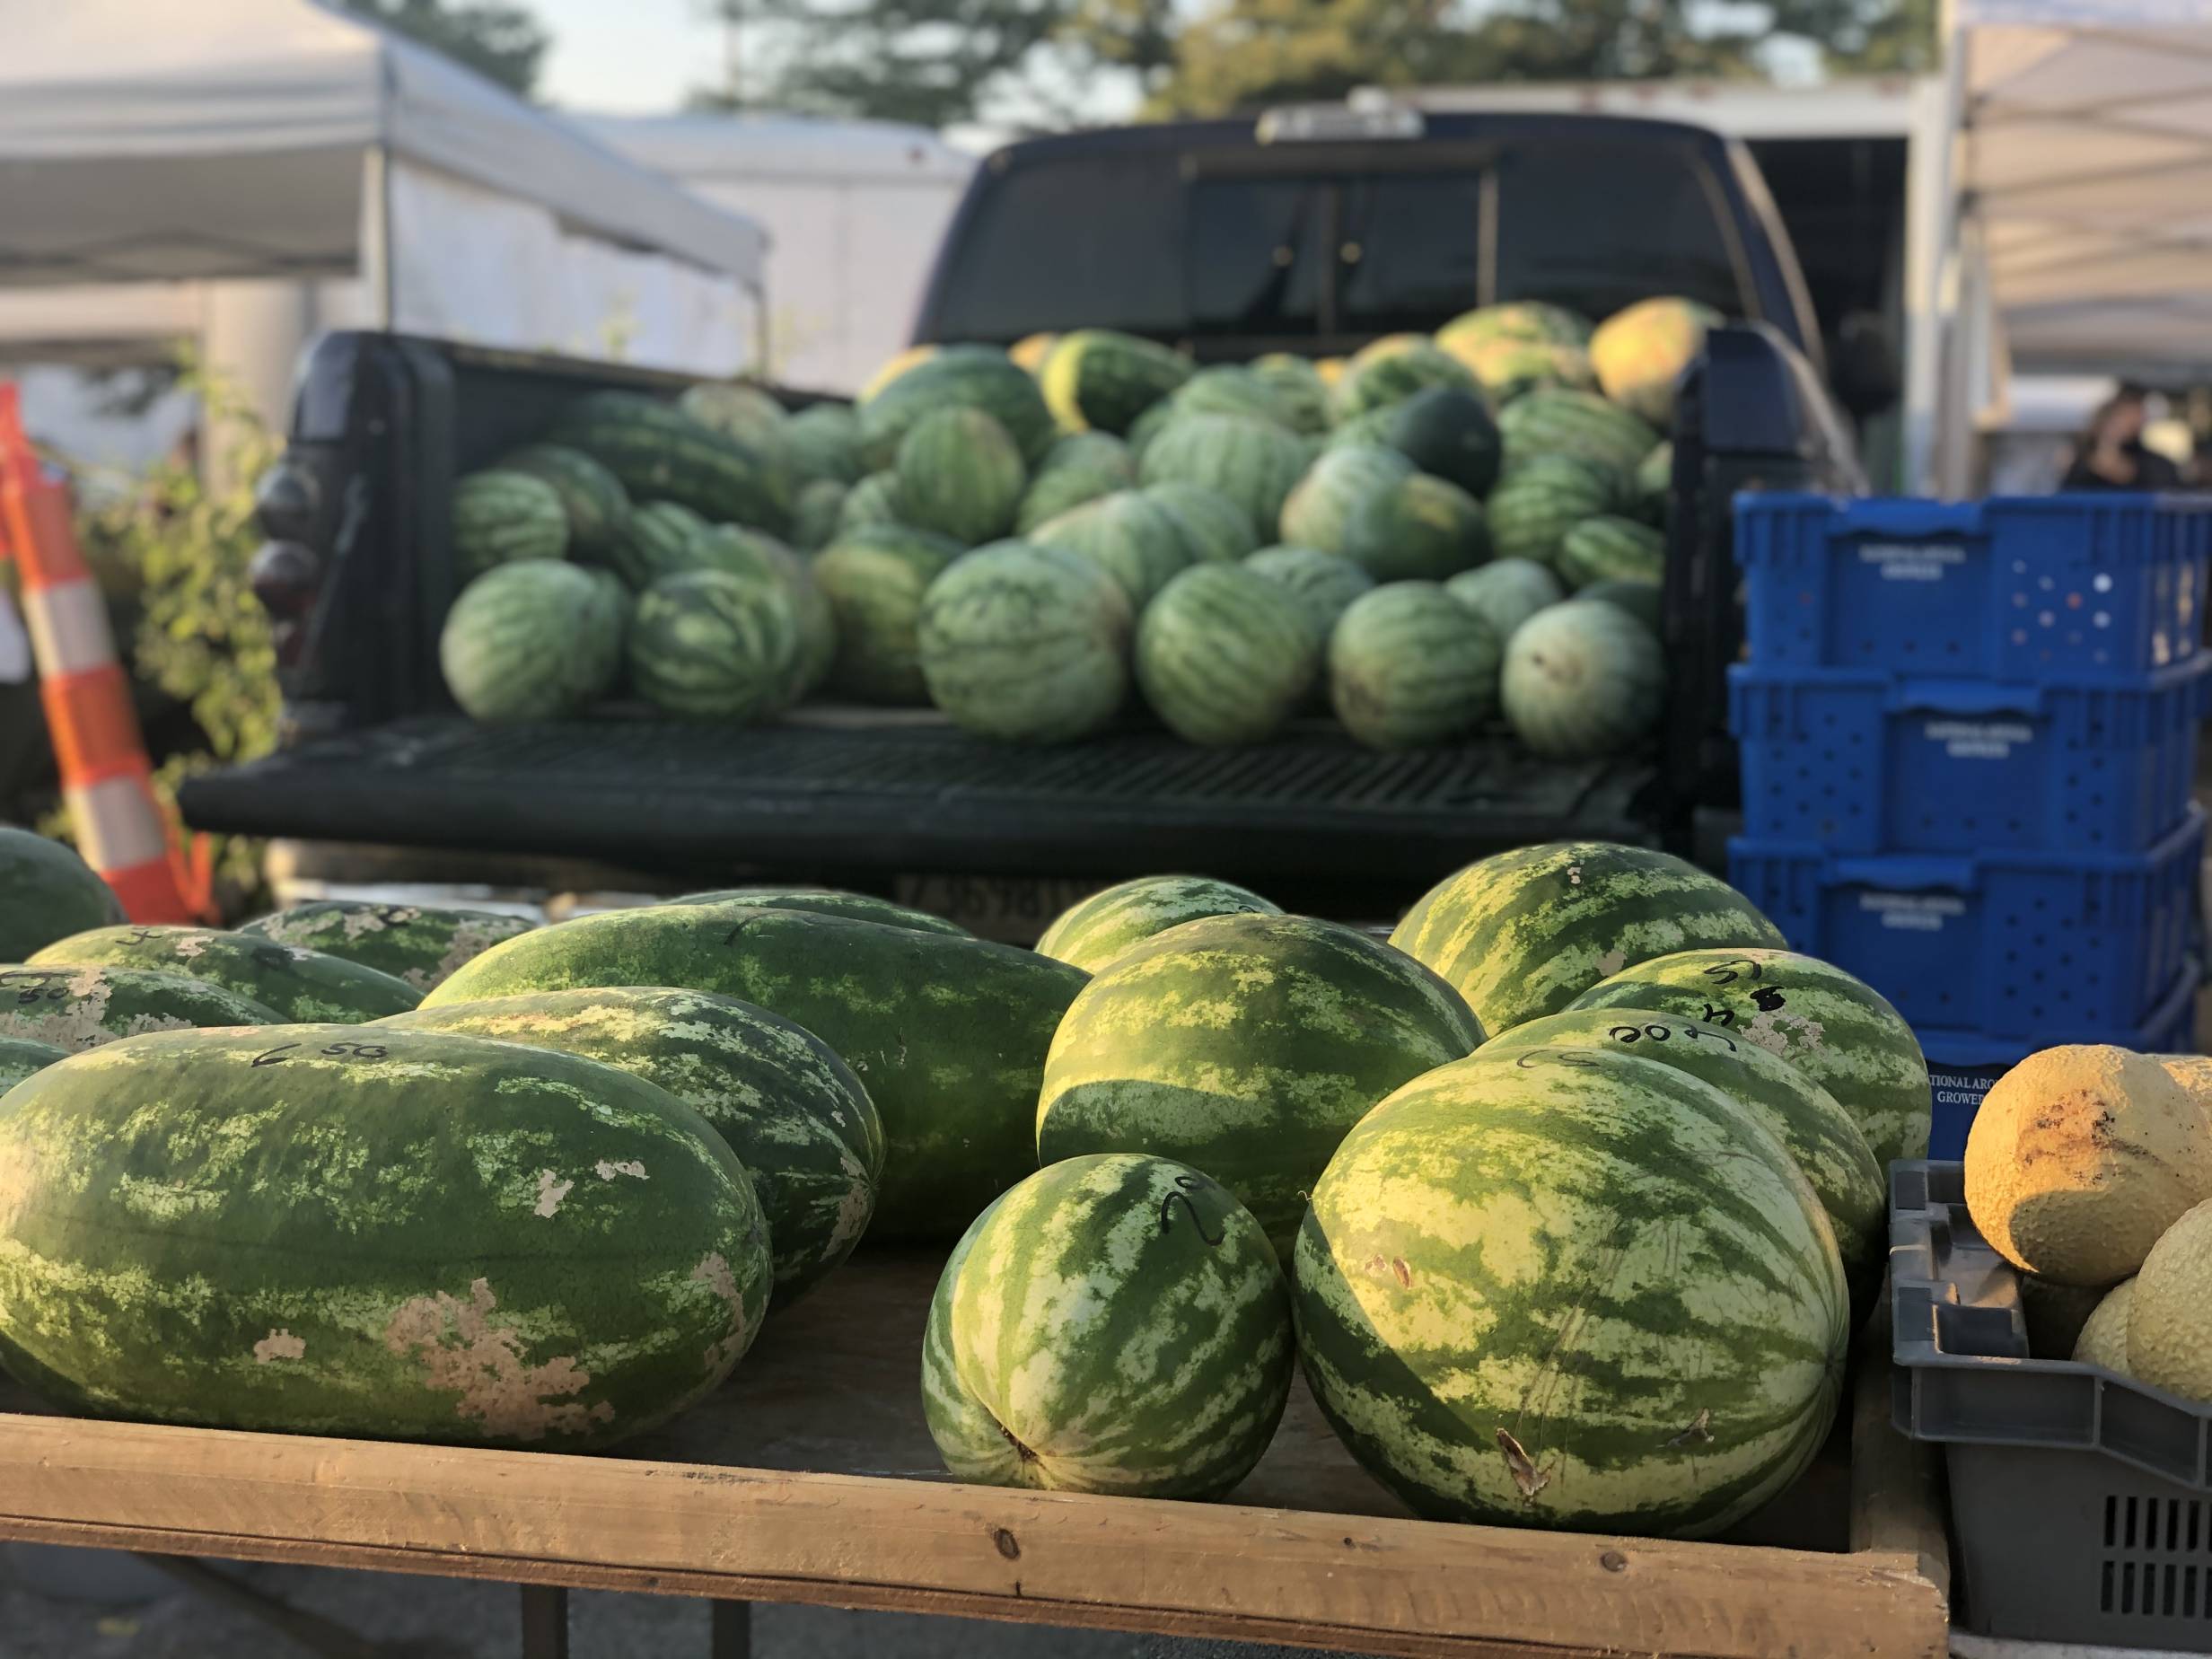 Several large watermelon sit on a wooden table. Behind the watermelons on display is a truckbed with many more watermelon. Photo by Alyssa Buckley.